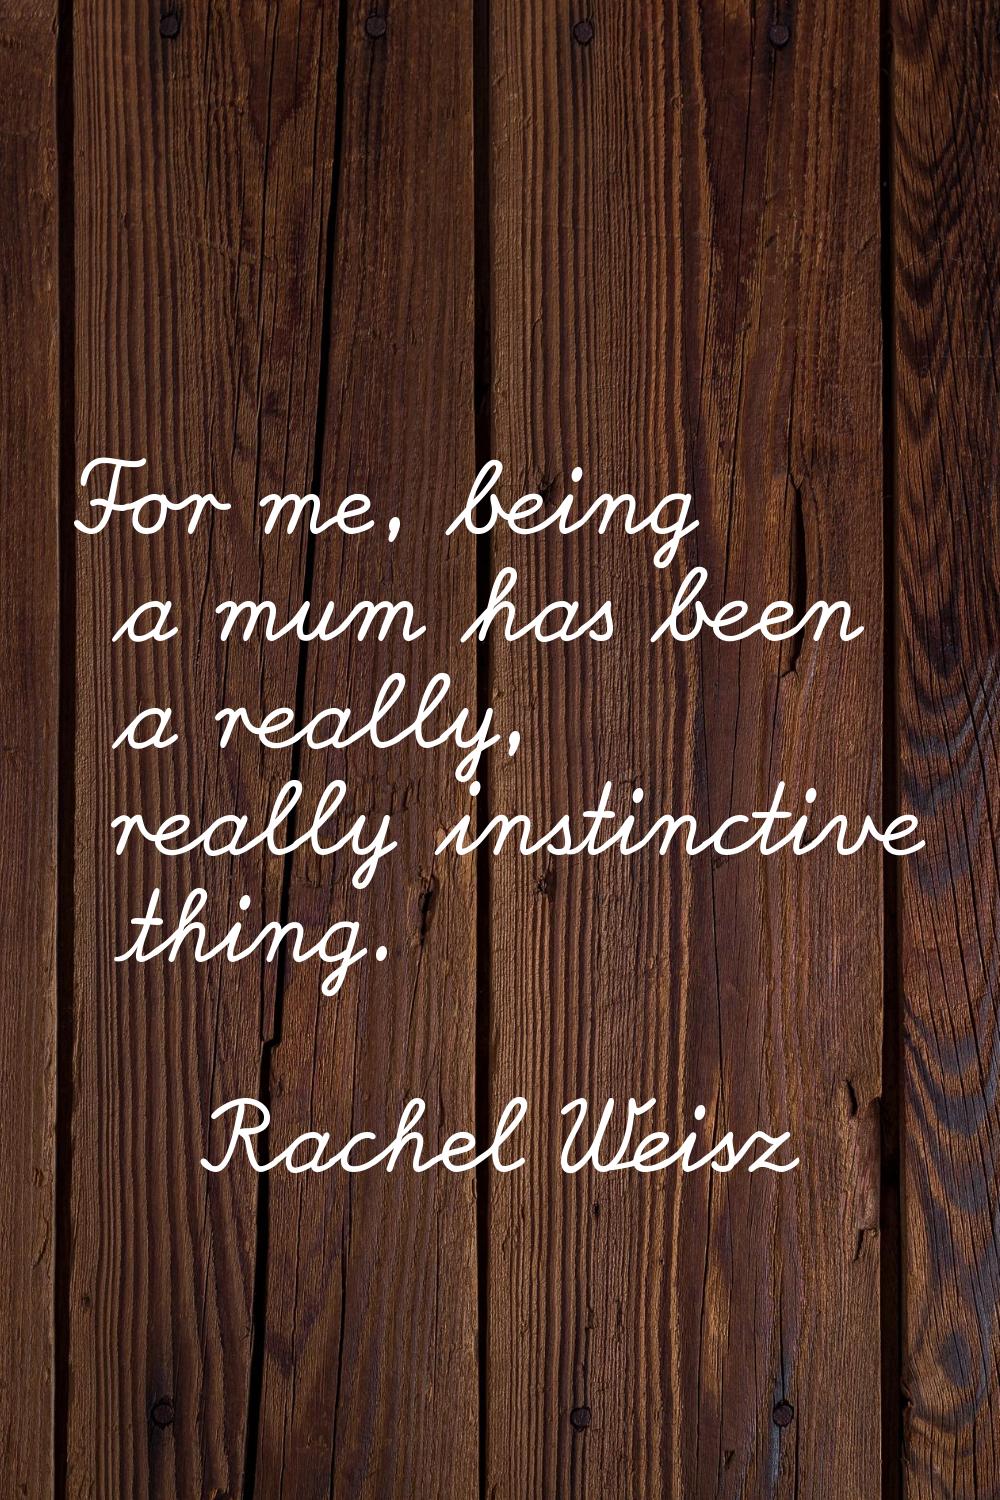 For me, being a mum has been a really, really instinctive thing.